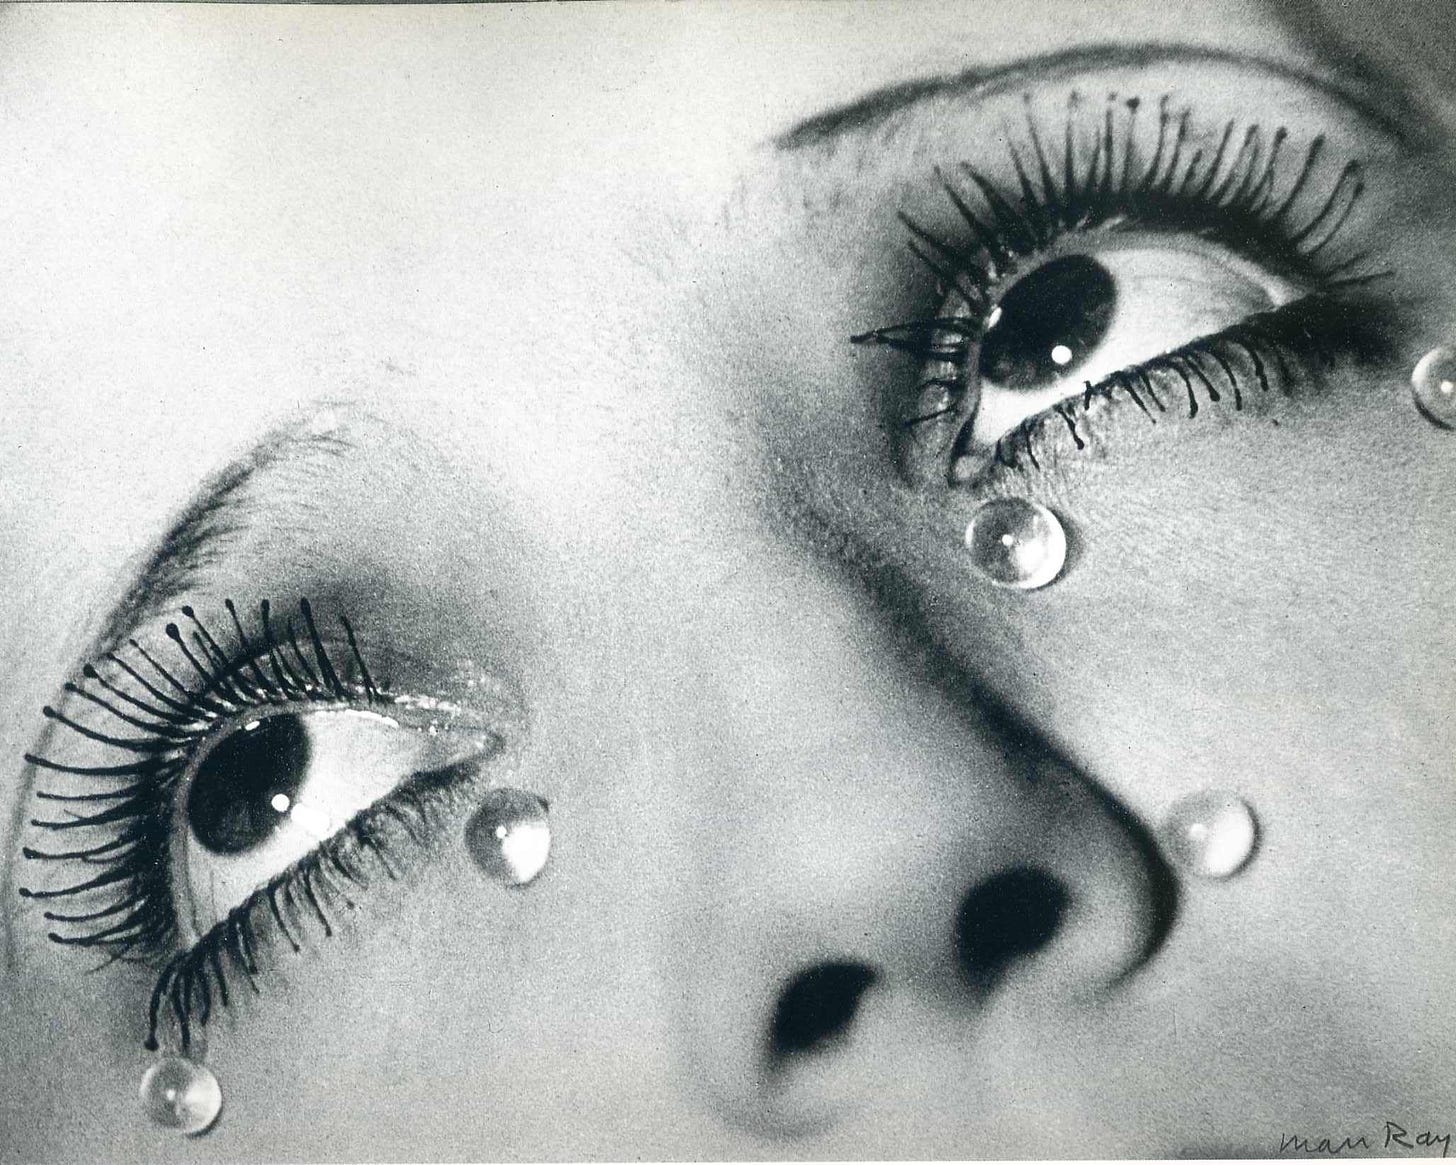 The 10 Most Famous Works by Man Ray – Canvas: A Blog By Saatchi Art